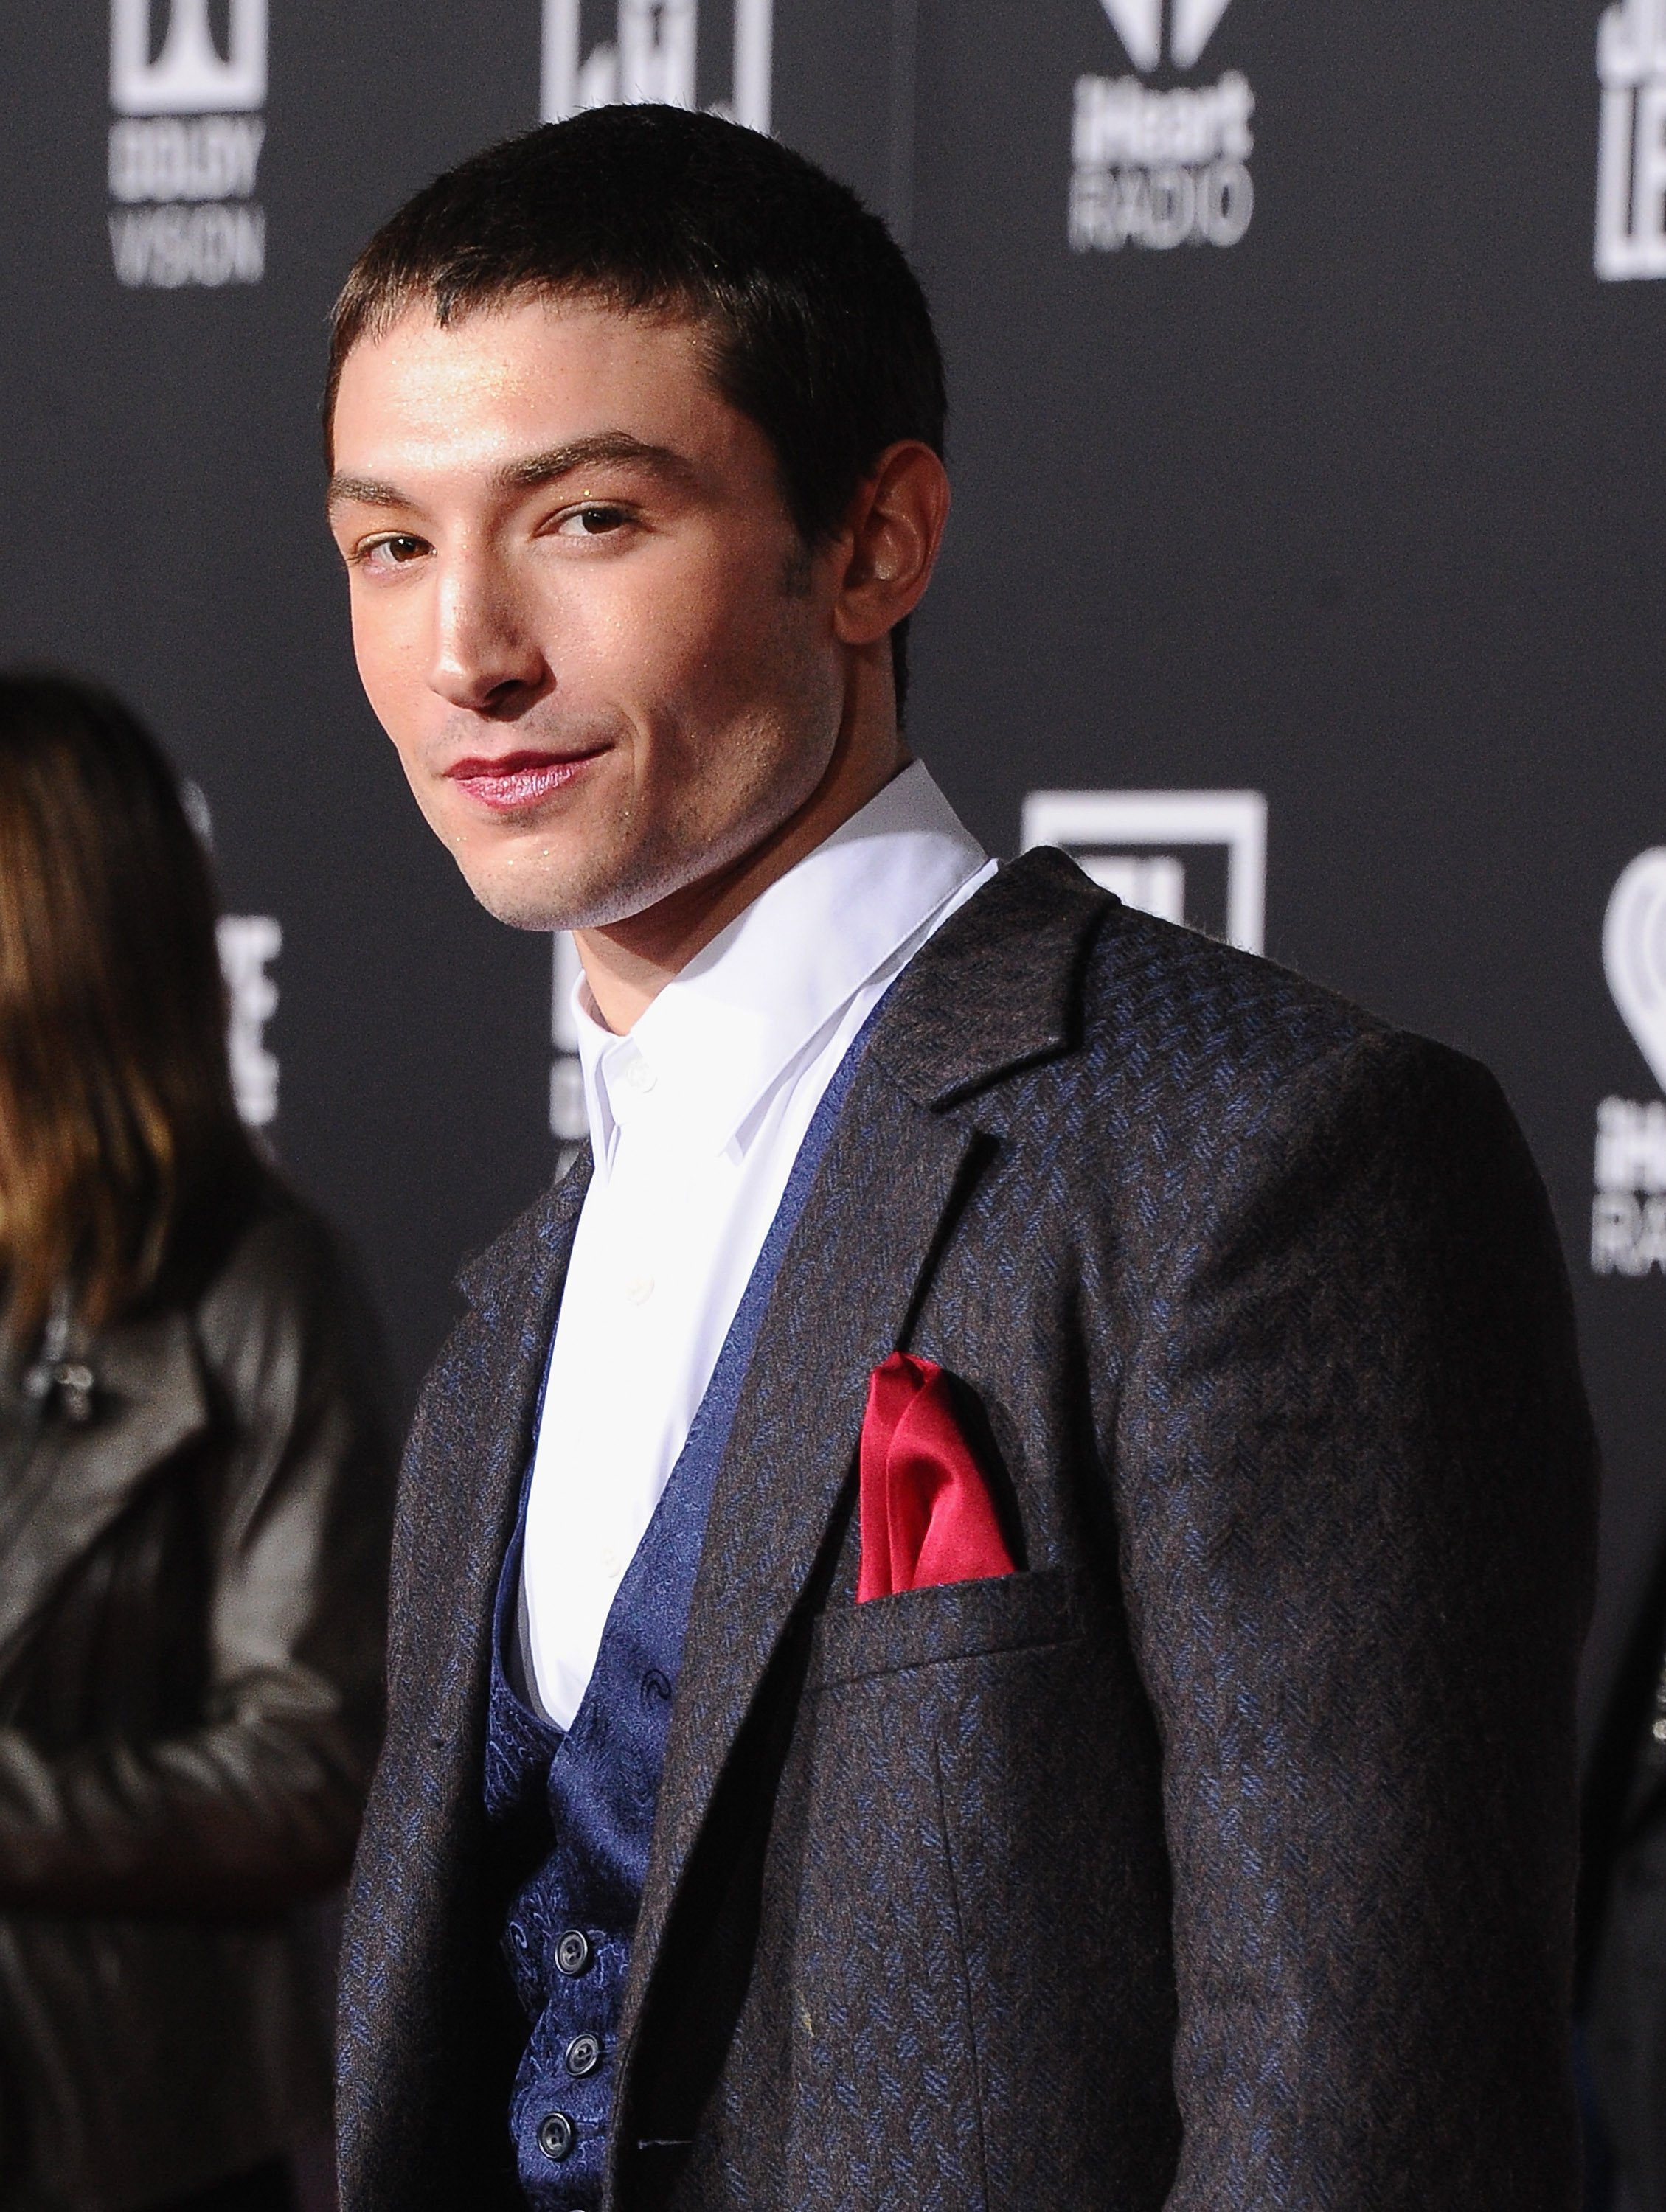 Ezra Miller attends the Los Angeles Premiere of Warner Bros. Pictures' "Justice League" at the Dolby Theater on November 13, 2017 in Hollywood, California.  |  Source: Getty Images